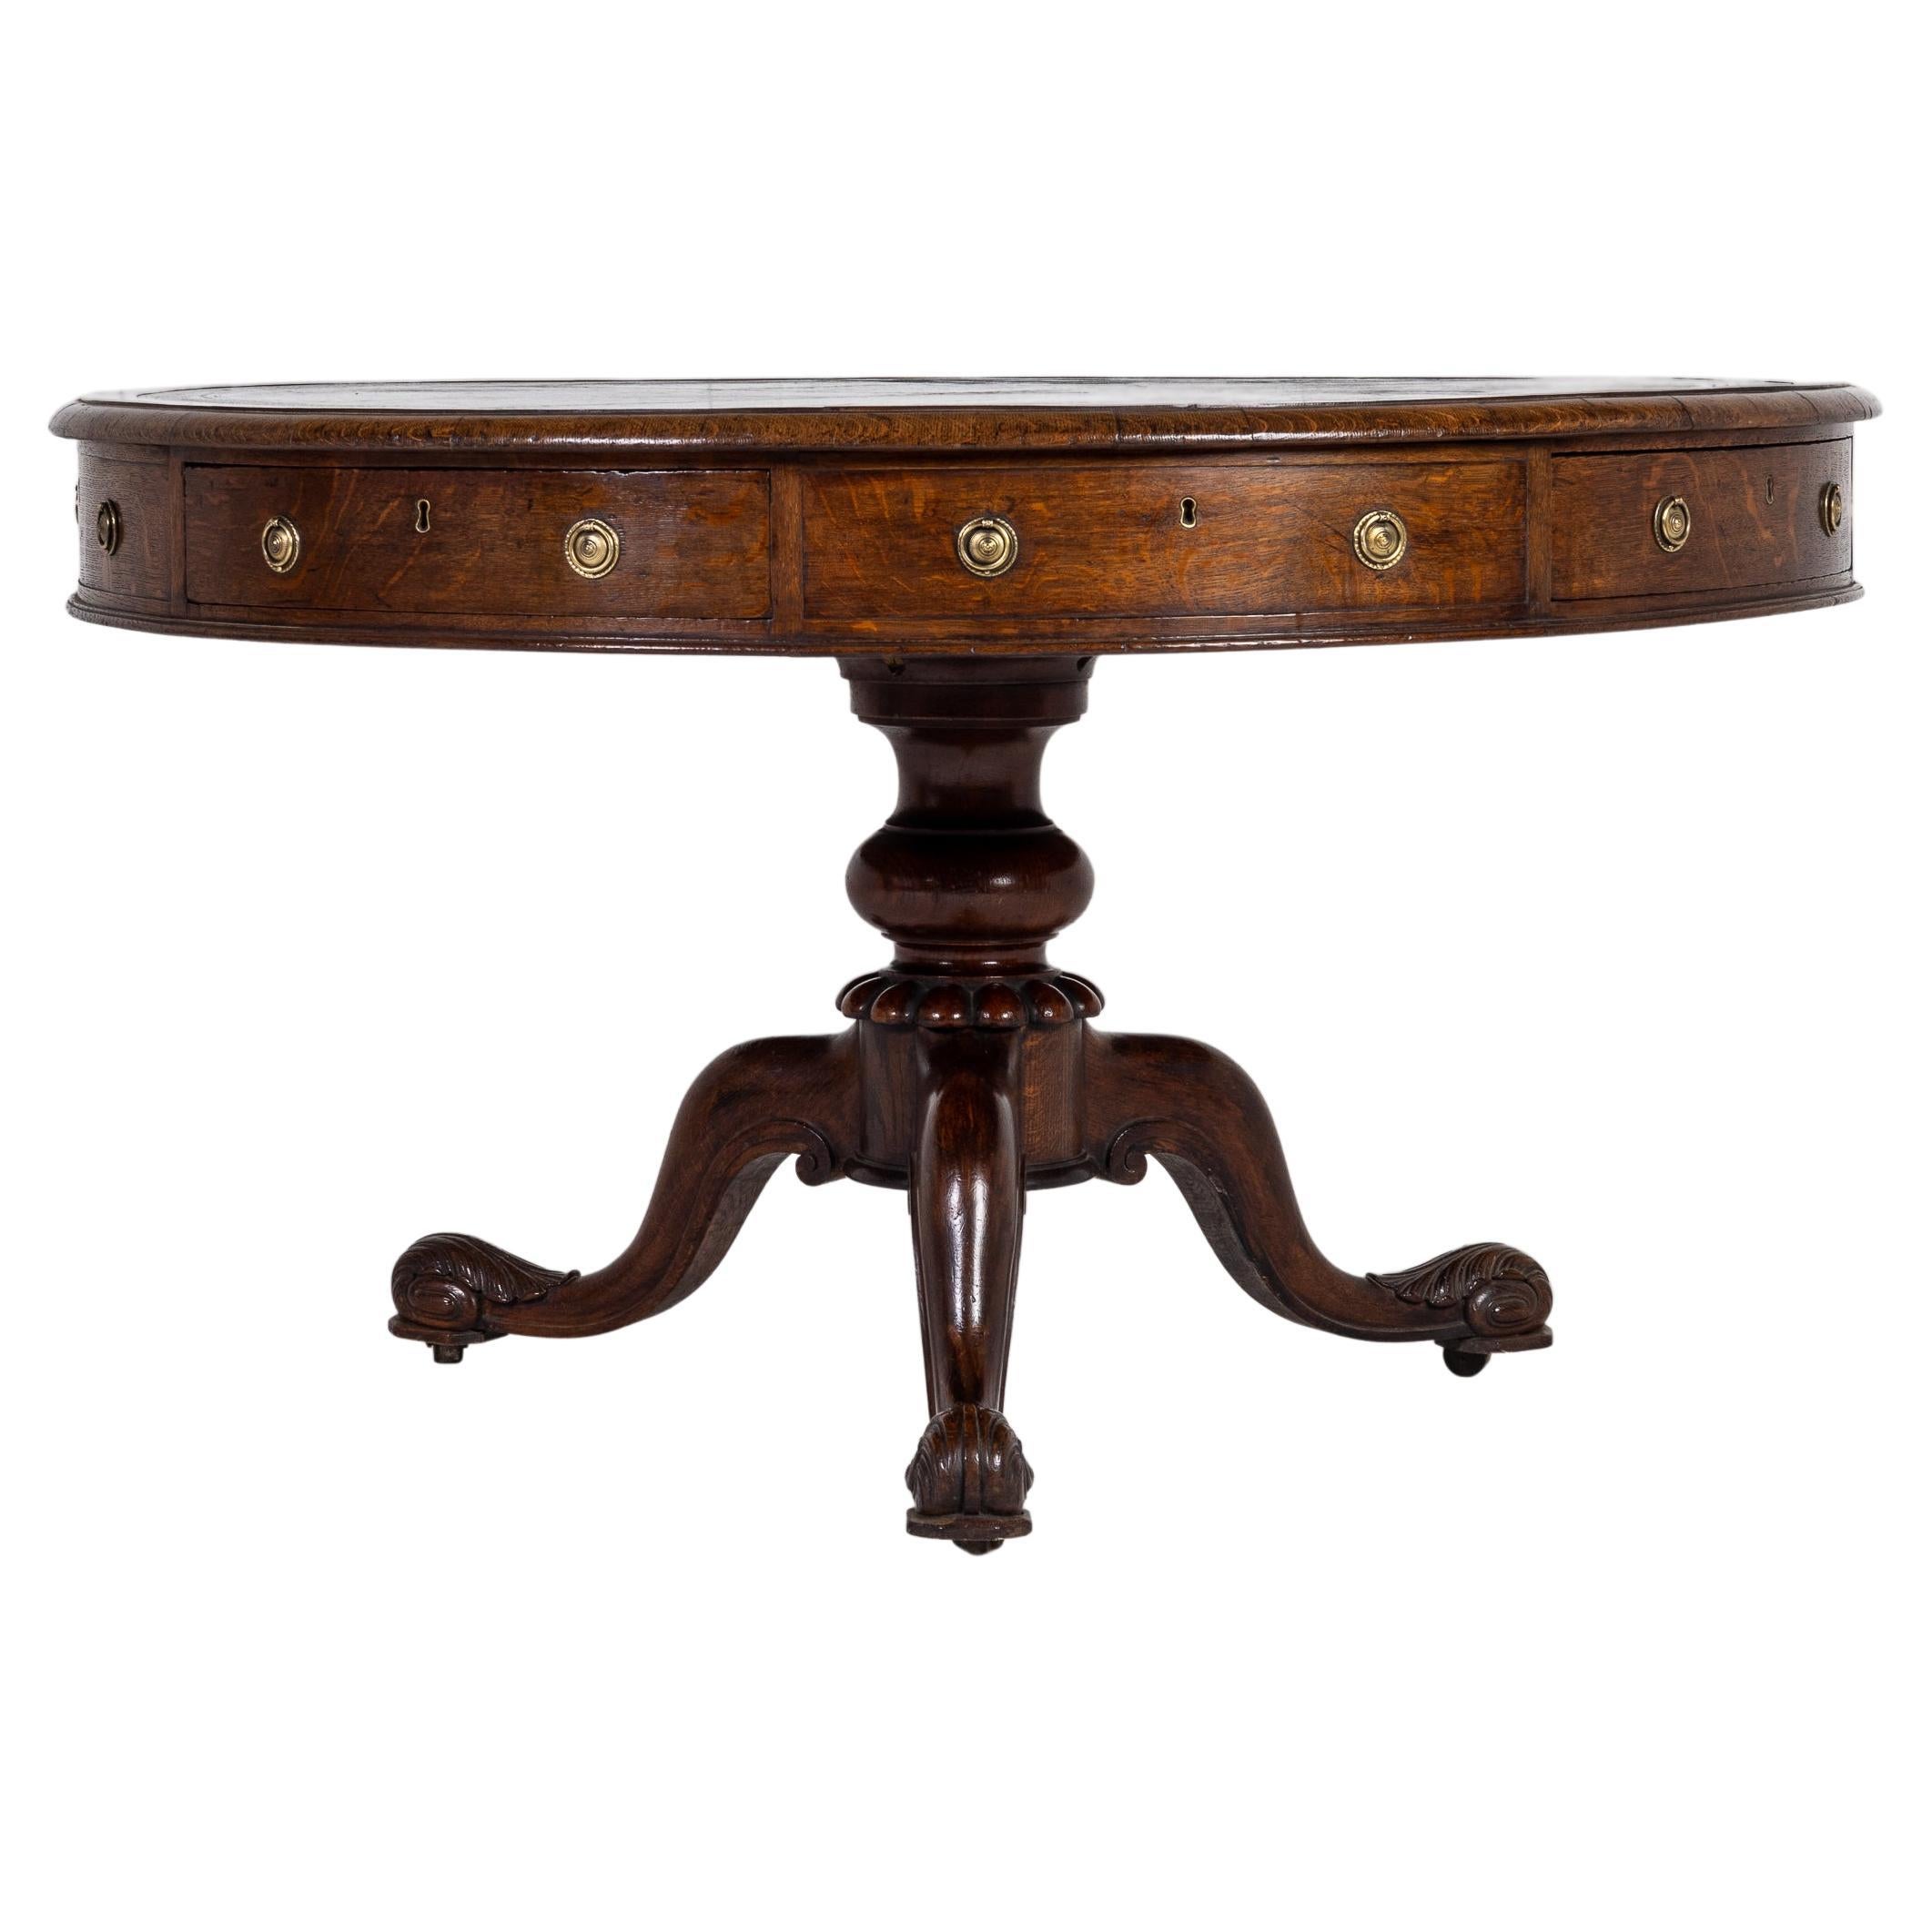 Late George IV/Early William IV Oak Drum Table (by Gillows) For Sale